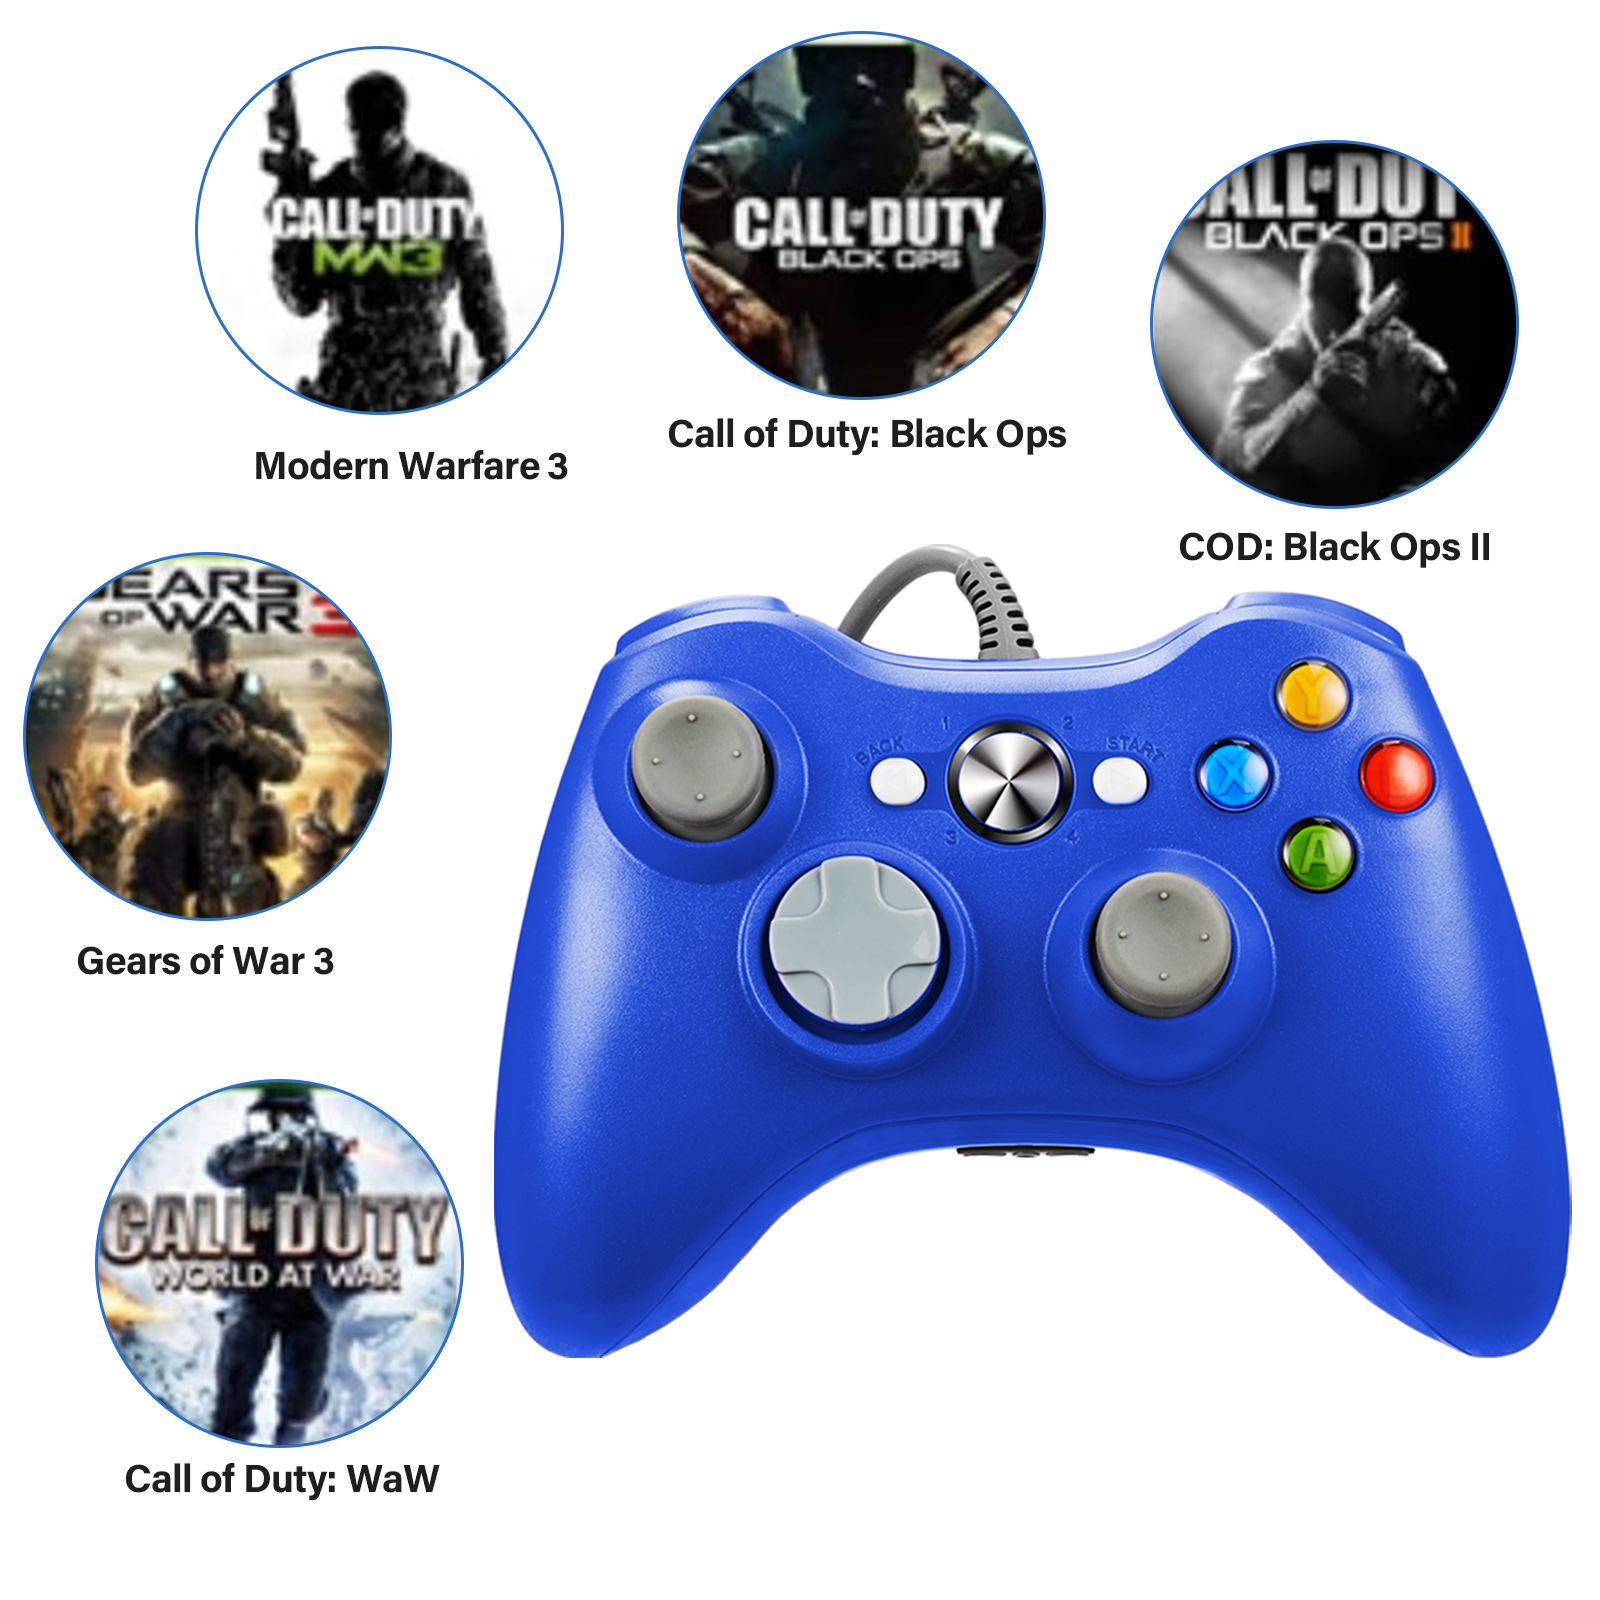 LUXMO Xbox 360 Wired Controlle with Shoulders Buttons for Xbox 360/Xbox 360 Slim/PC Windows 7 8 10 Game (Blue) - image 3 of 7